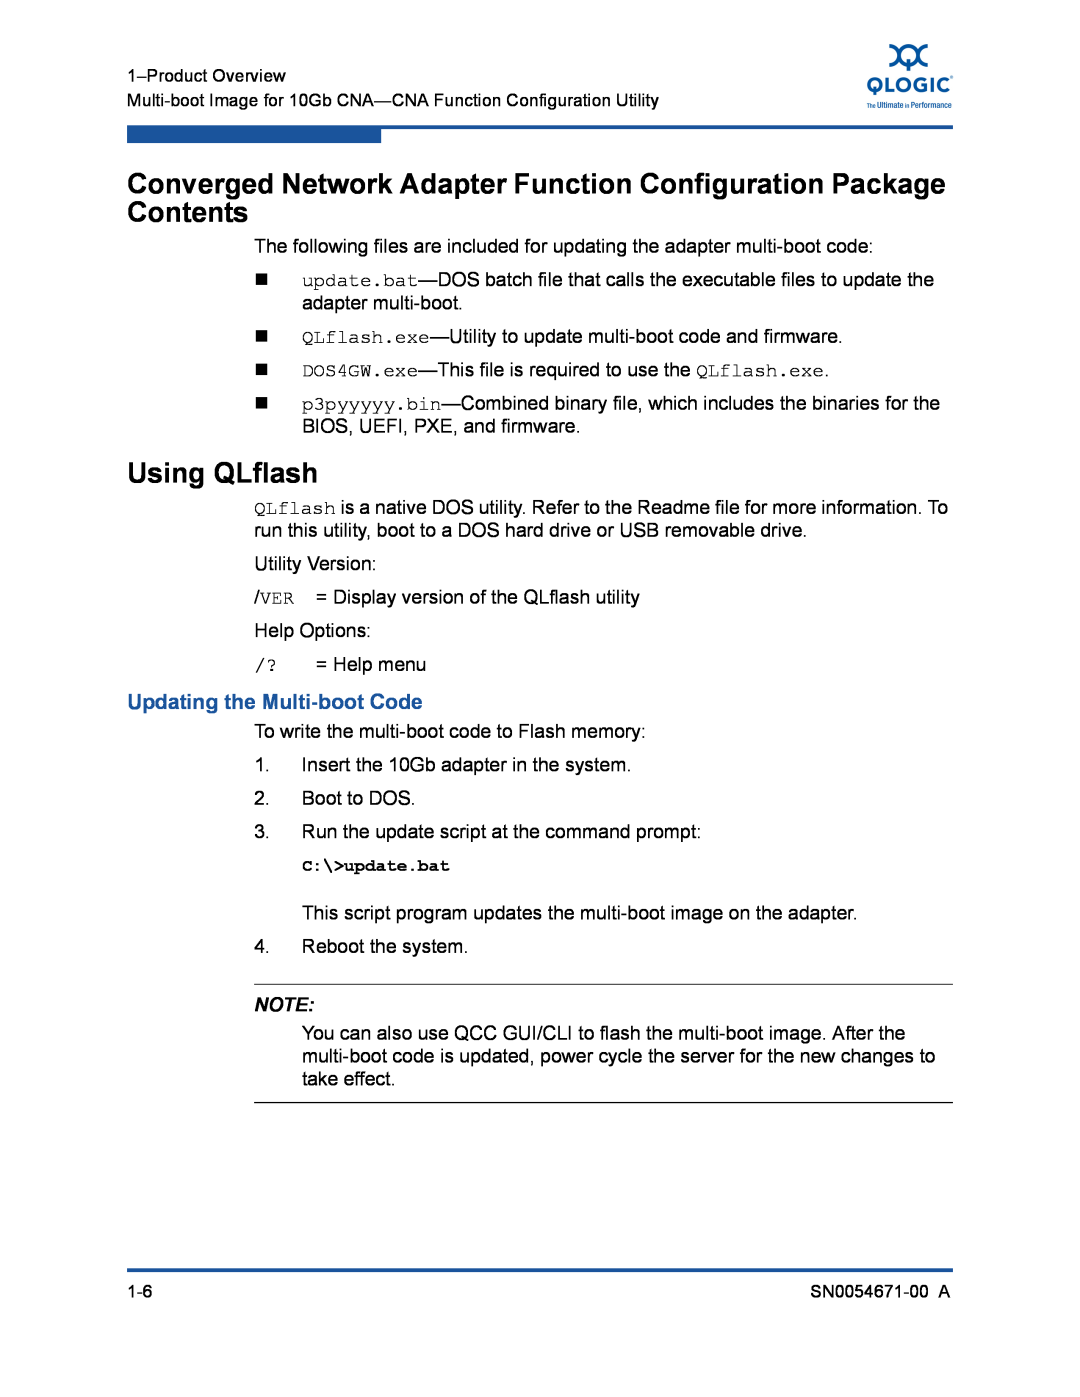 Q-Logic 8200, 3200 manual Converged Network Adapter Function Configuration Package Contents, Using QLflash 